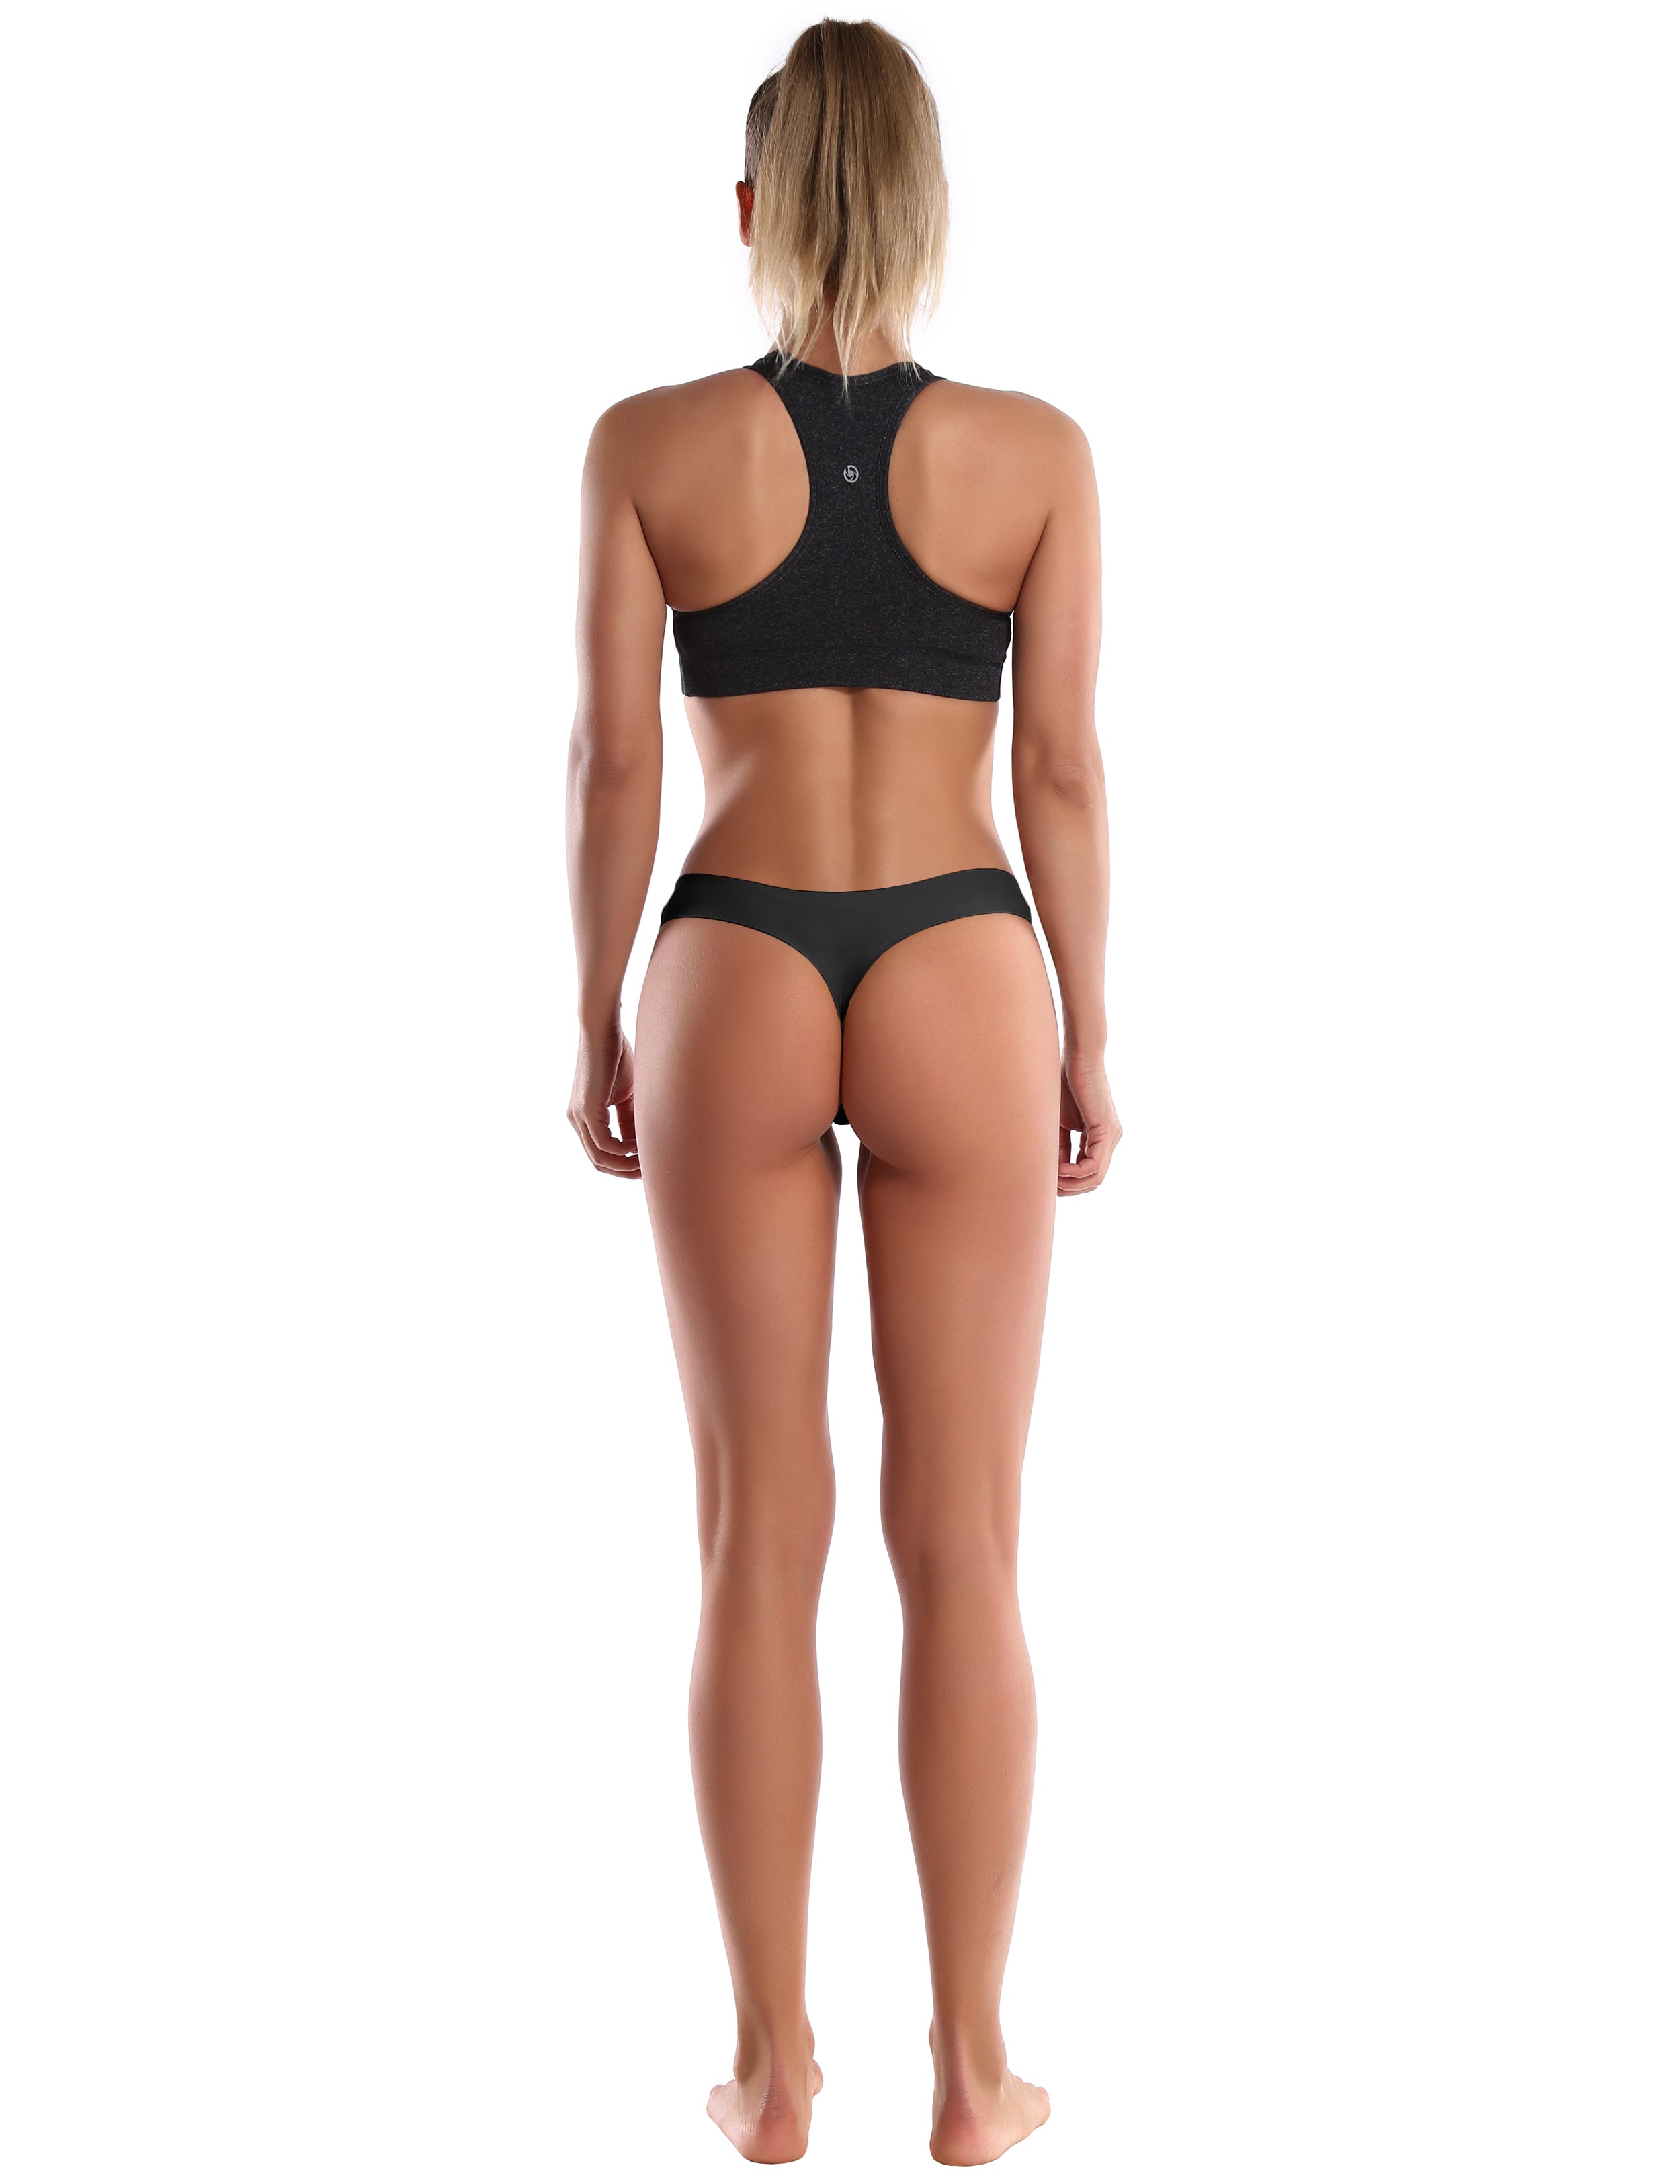 Invisibles Sport Thongs Black Sleek, soft, smooth and totally comfortable: our newest thongs style is here. High elasticity High density Softest-ever fabric Laser cutting Unsealed Comfortable No panty lines Machine wash 95% Nylon, 5% Spandex